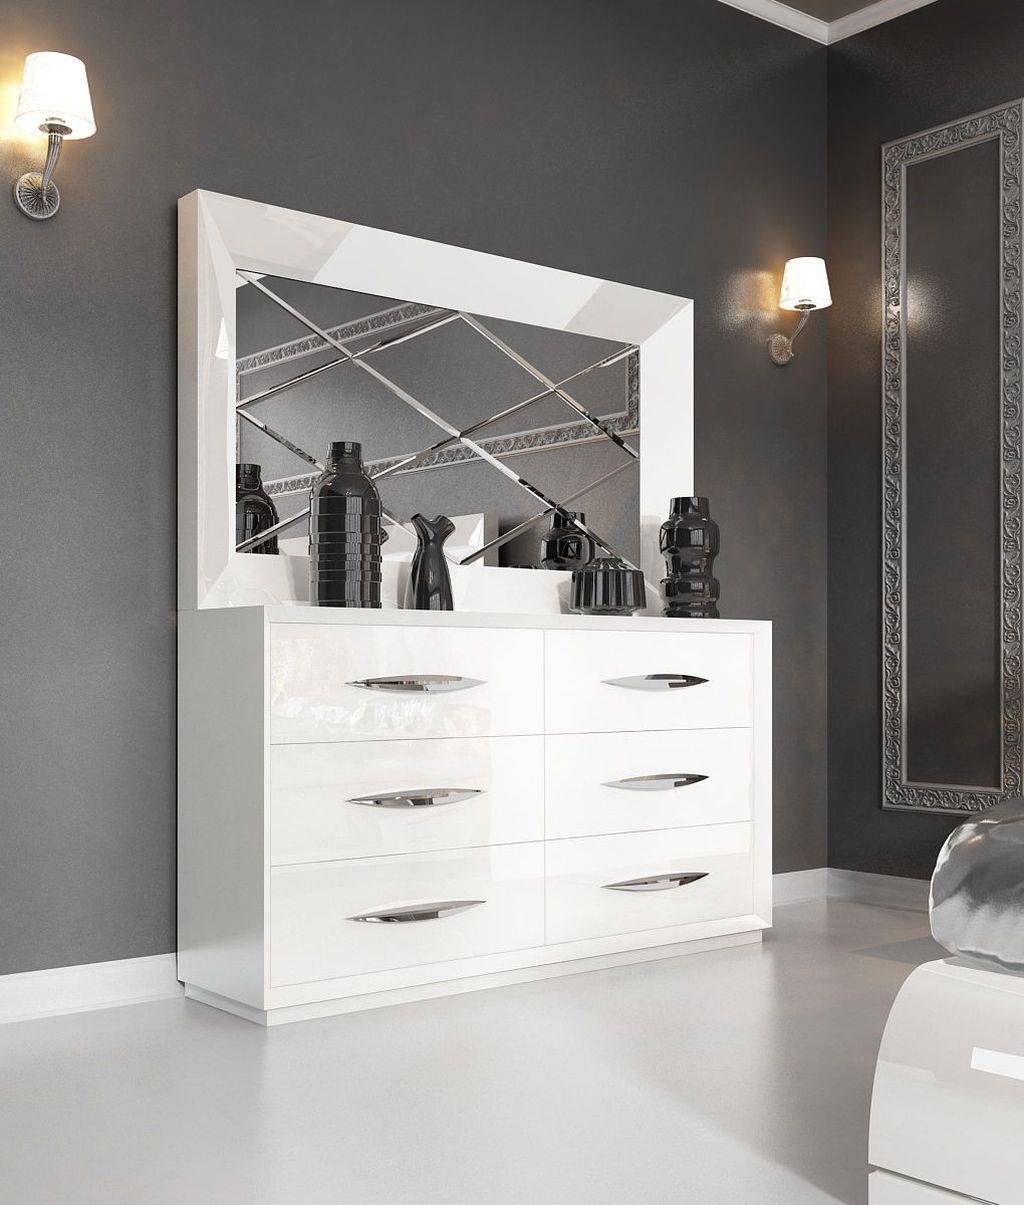 Stylish Bedroom Dressers Ideas With Mirrors That You Need To Try 08